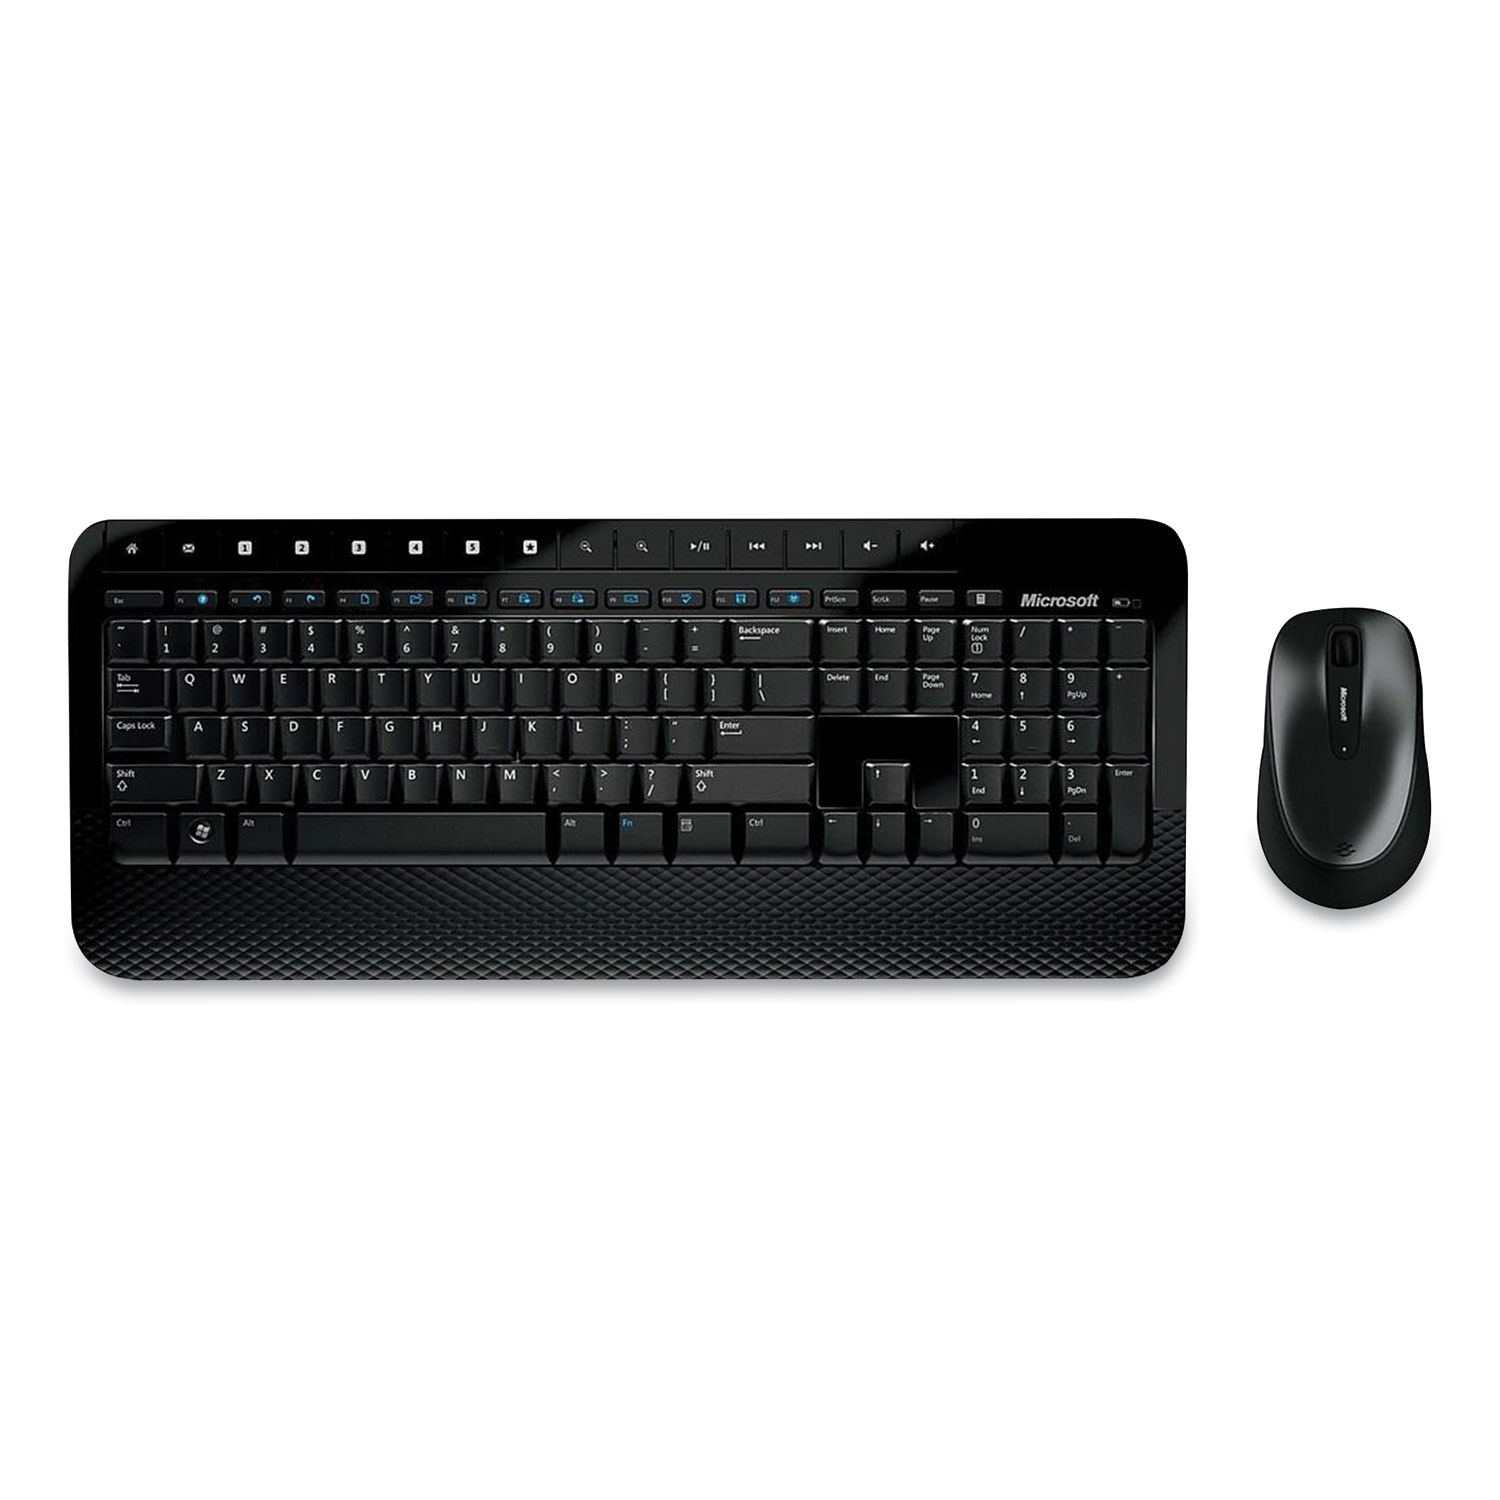  Microsoft M7J-00001 Desktop 2000 Wireless Keyboard and Mouse Combo, 2.4 GHz Frequency, Black (MSF323847) 